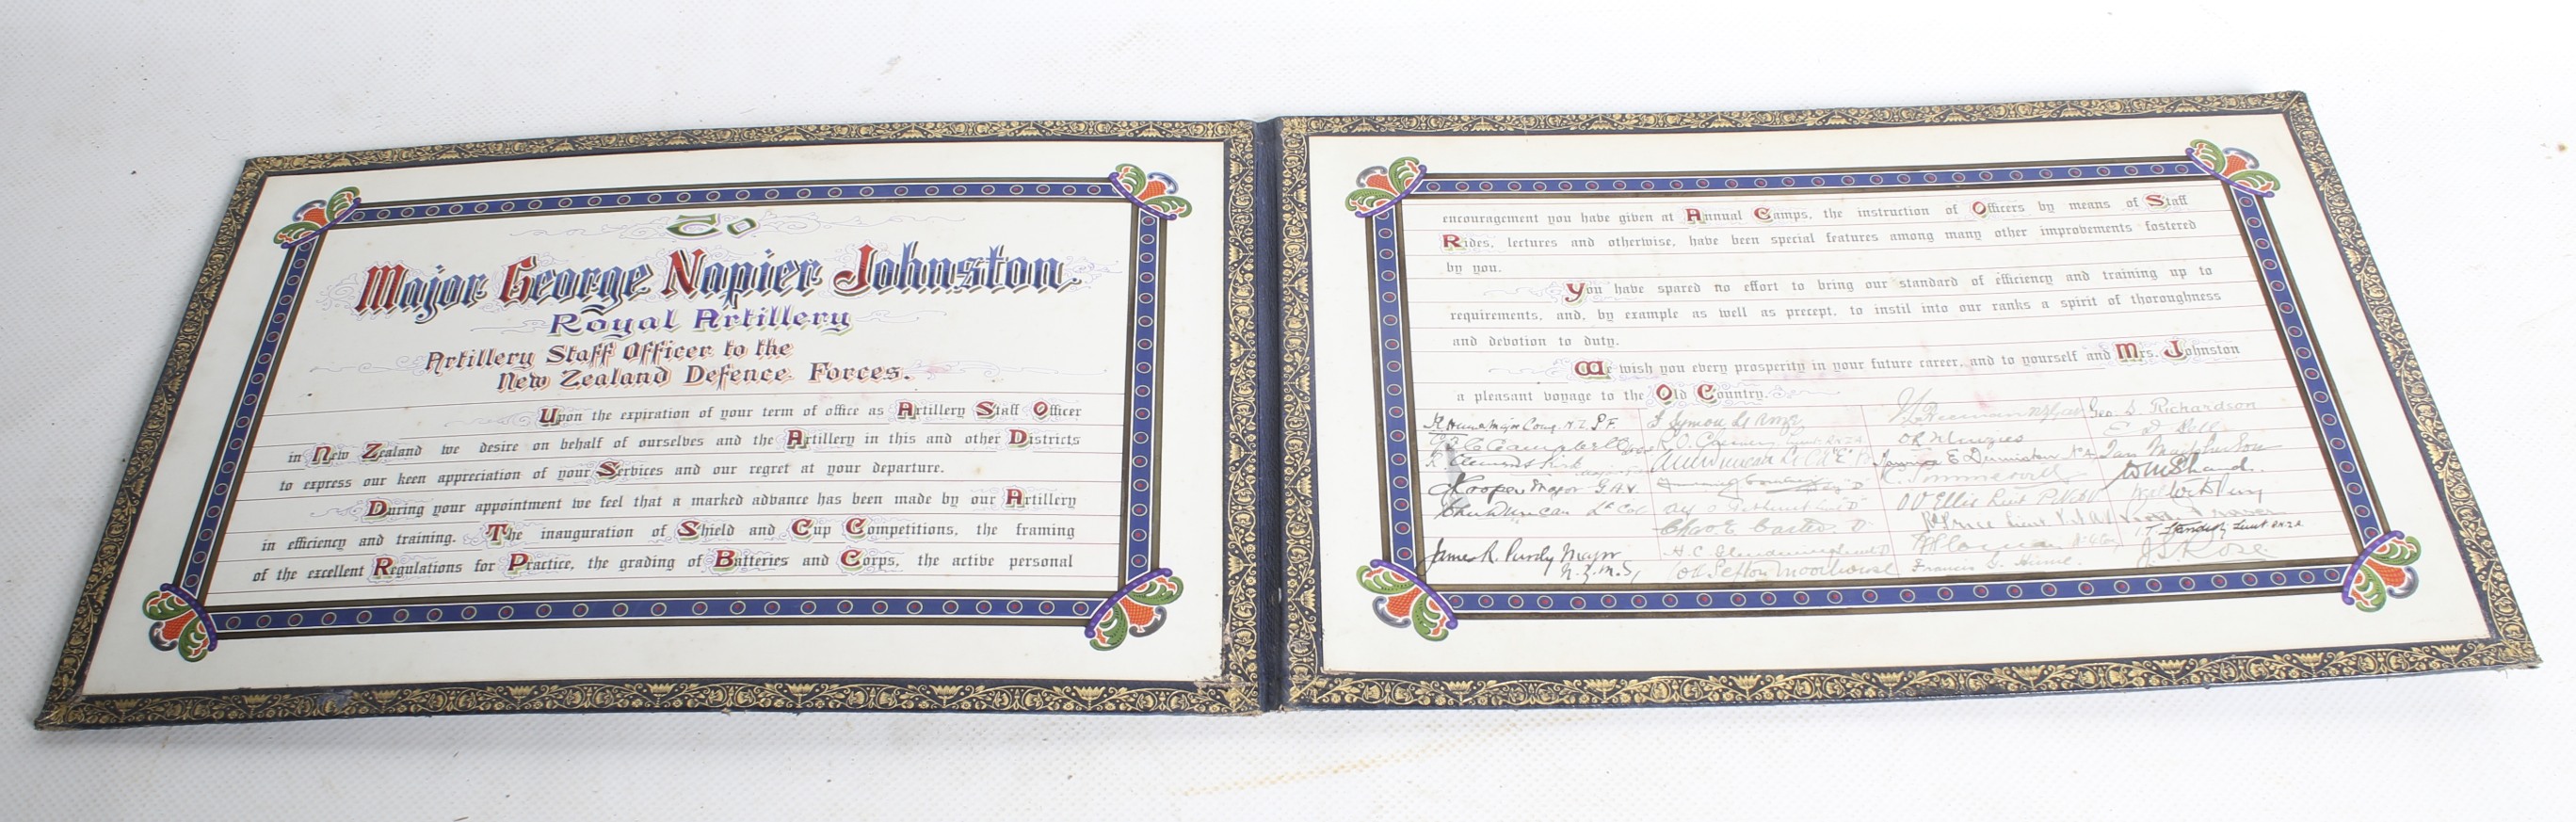 A circa 1900 album of photographs and ephemera, an autograph book and a certificate of thanks. - Image 6 of 6